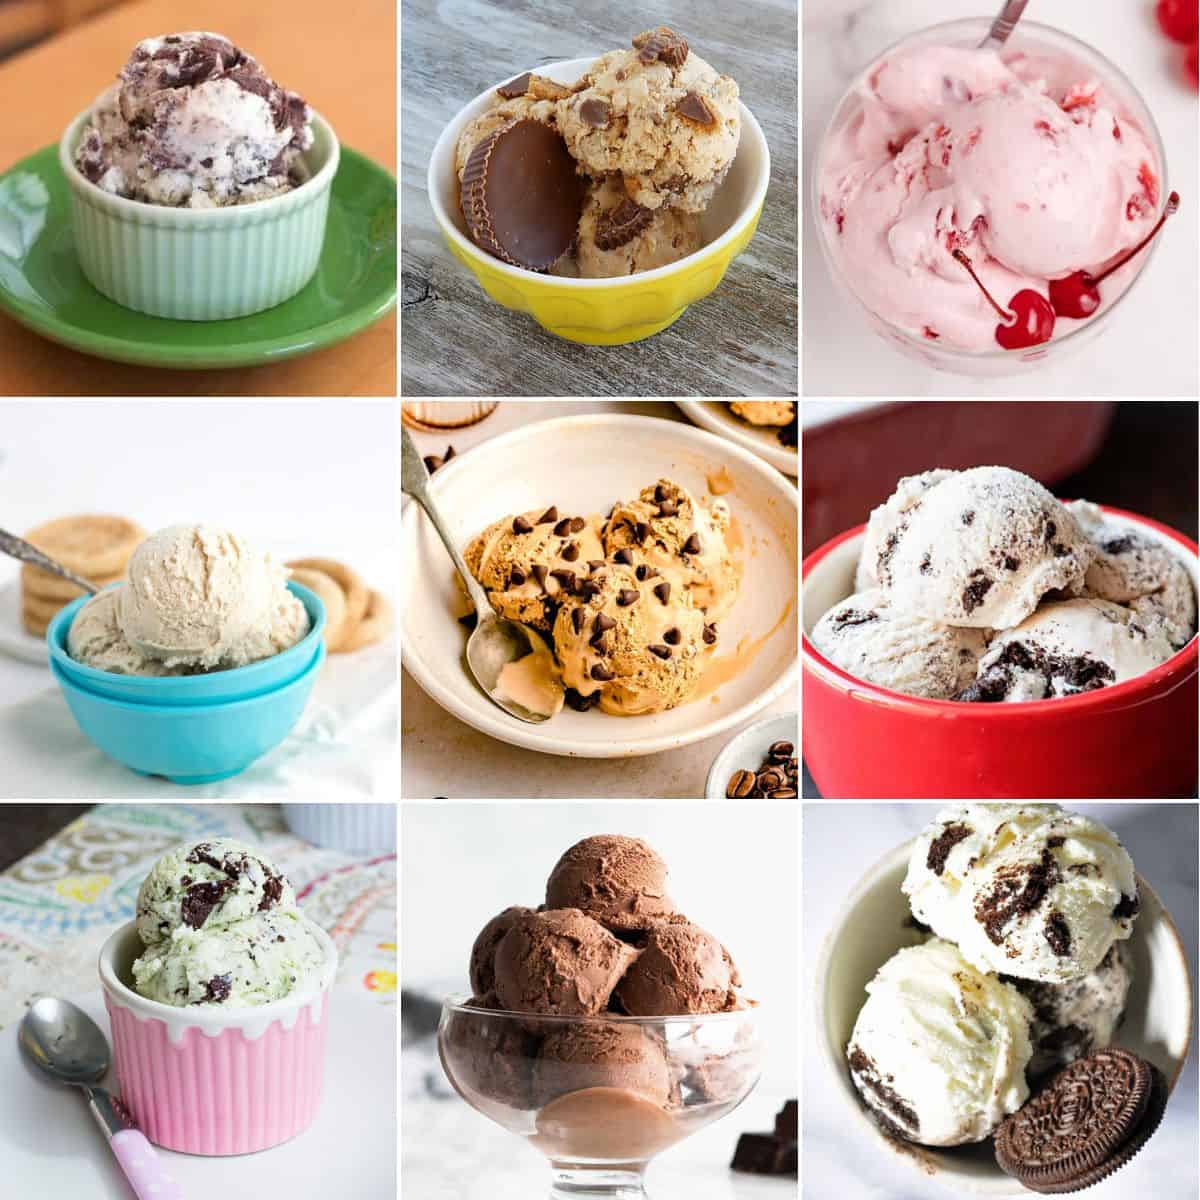 The 5 Best Ice Cream Makers of 2024 - Two Peas & Their Pod